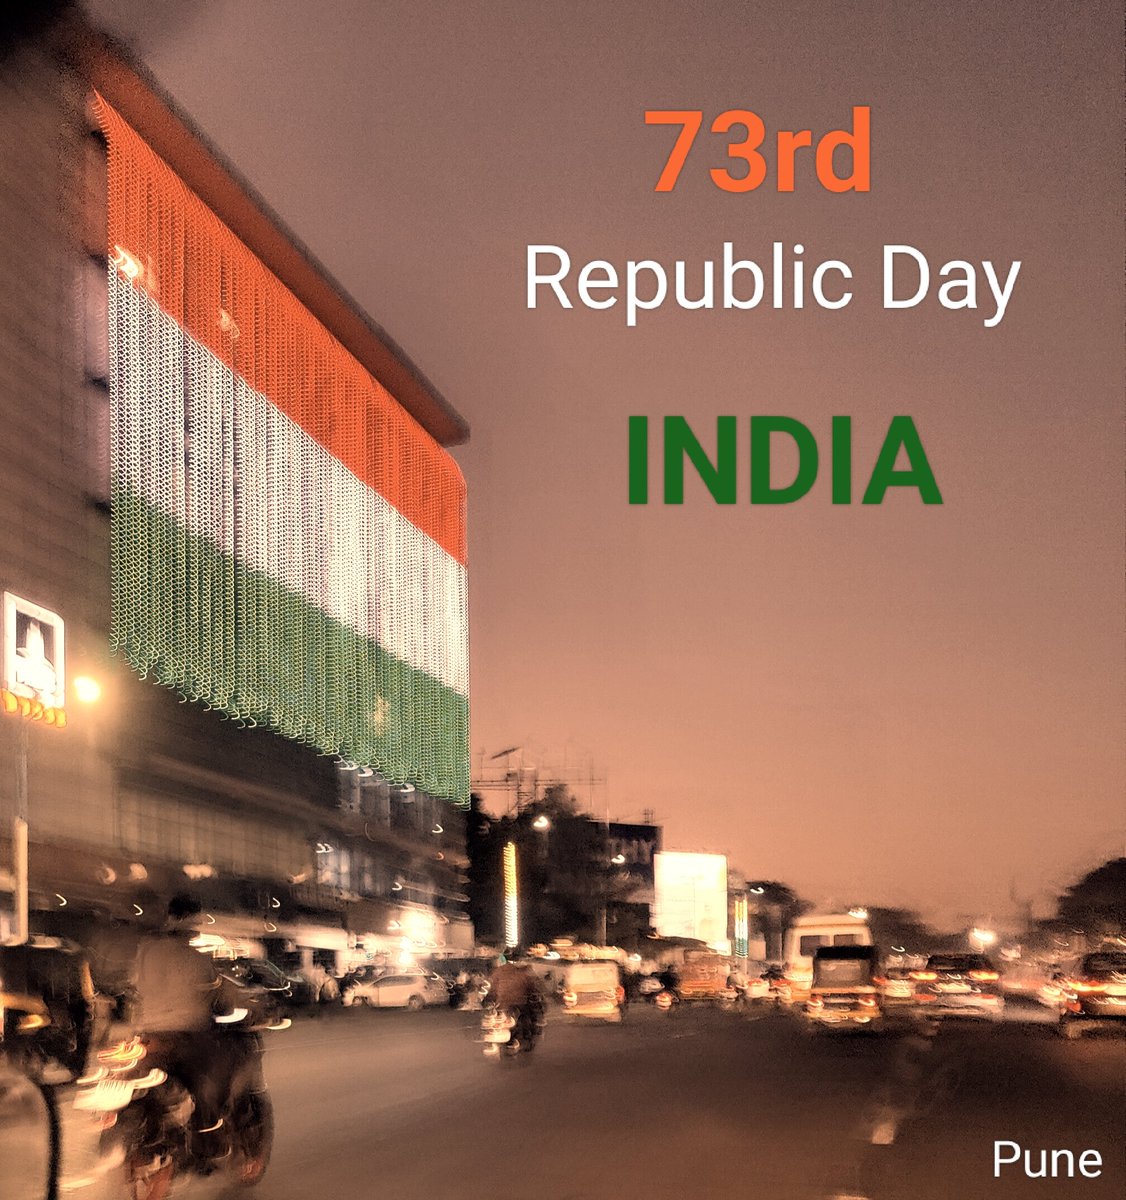 Why is it the 74th year celebration🇮🇳🤔
#73rdRepublicDay